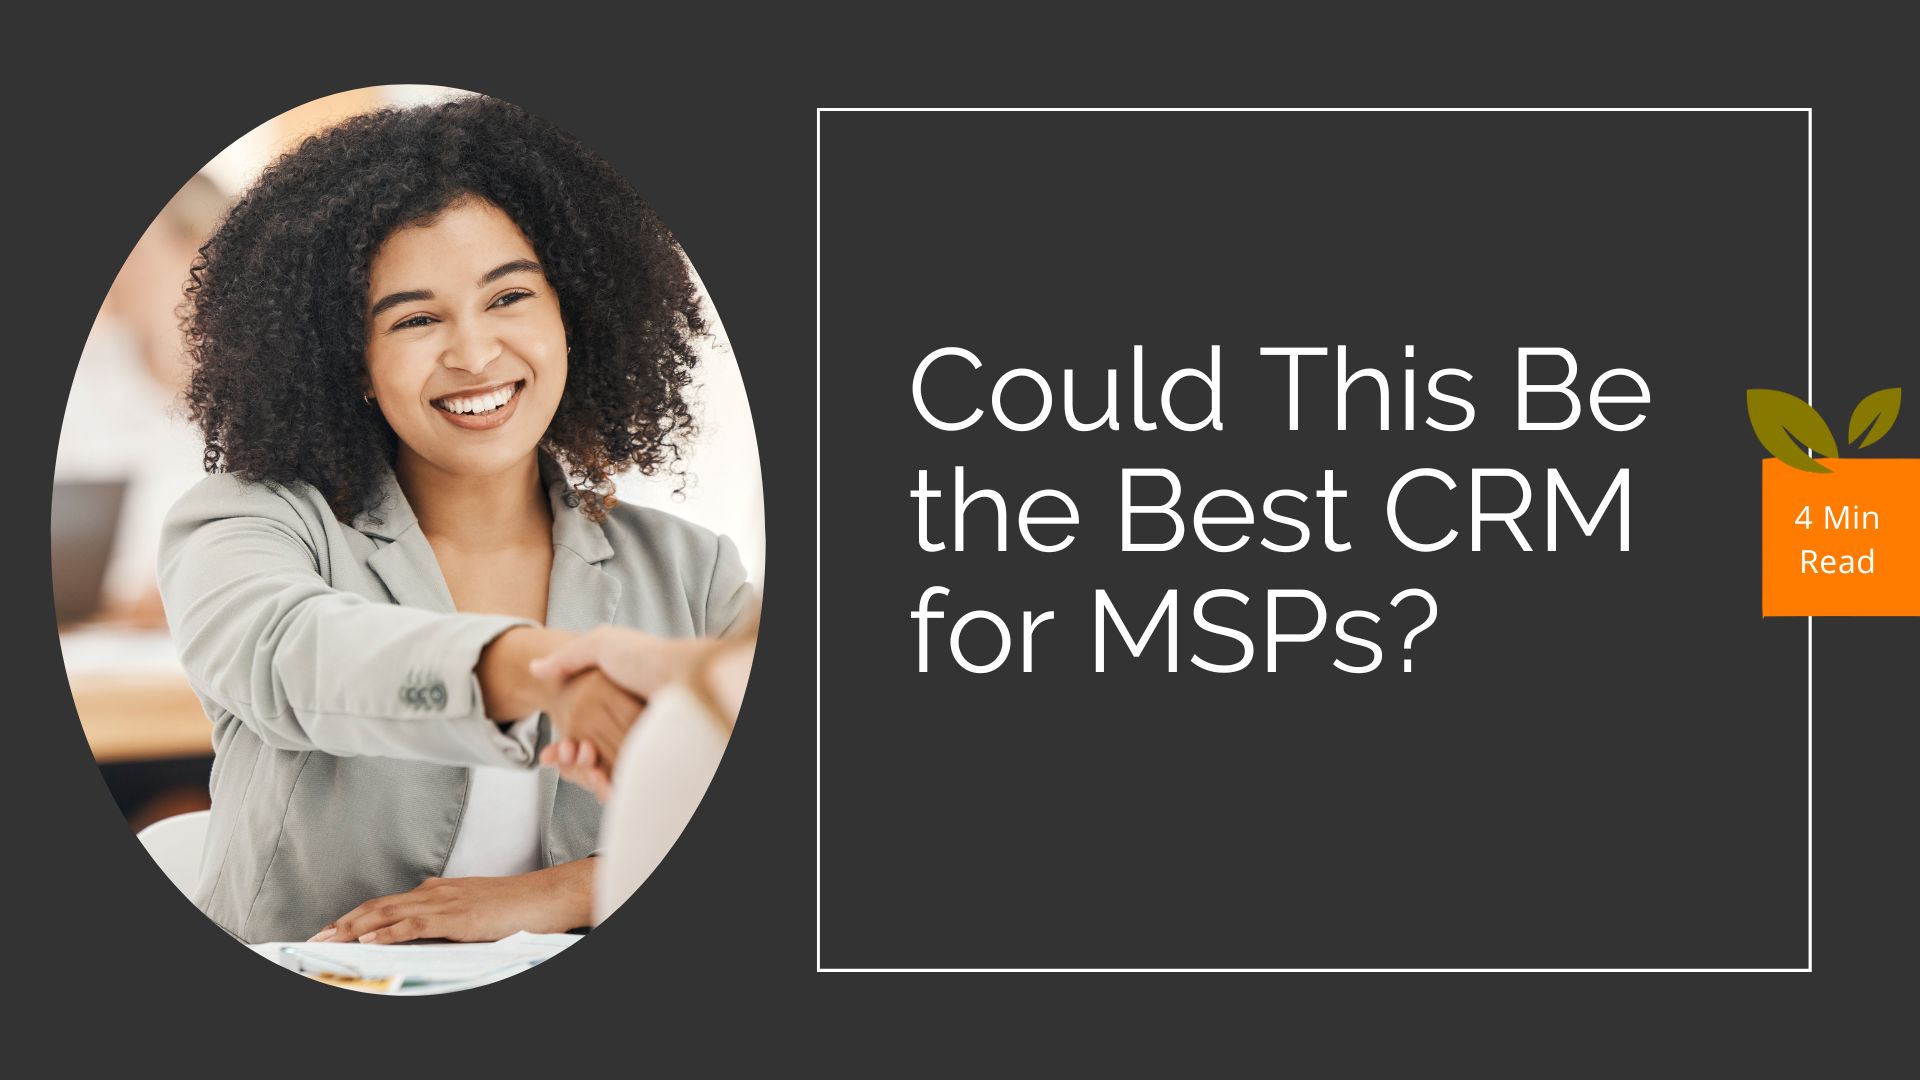 Could This Be the Best CRM for MSPs